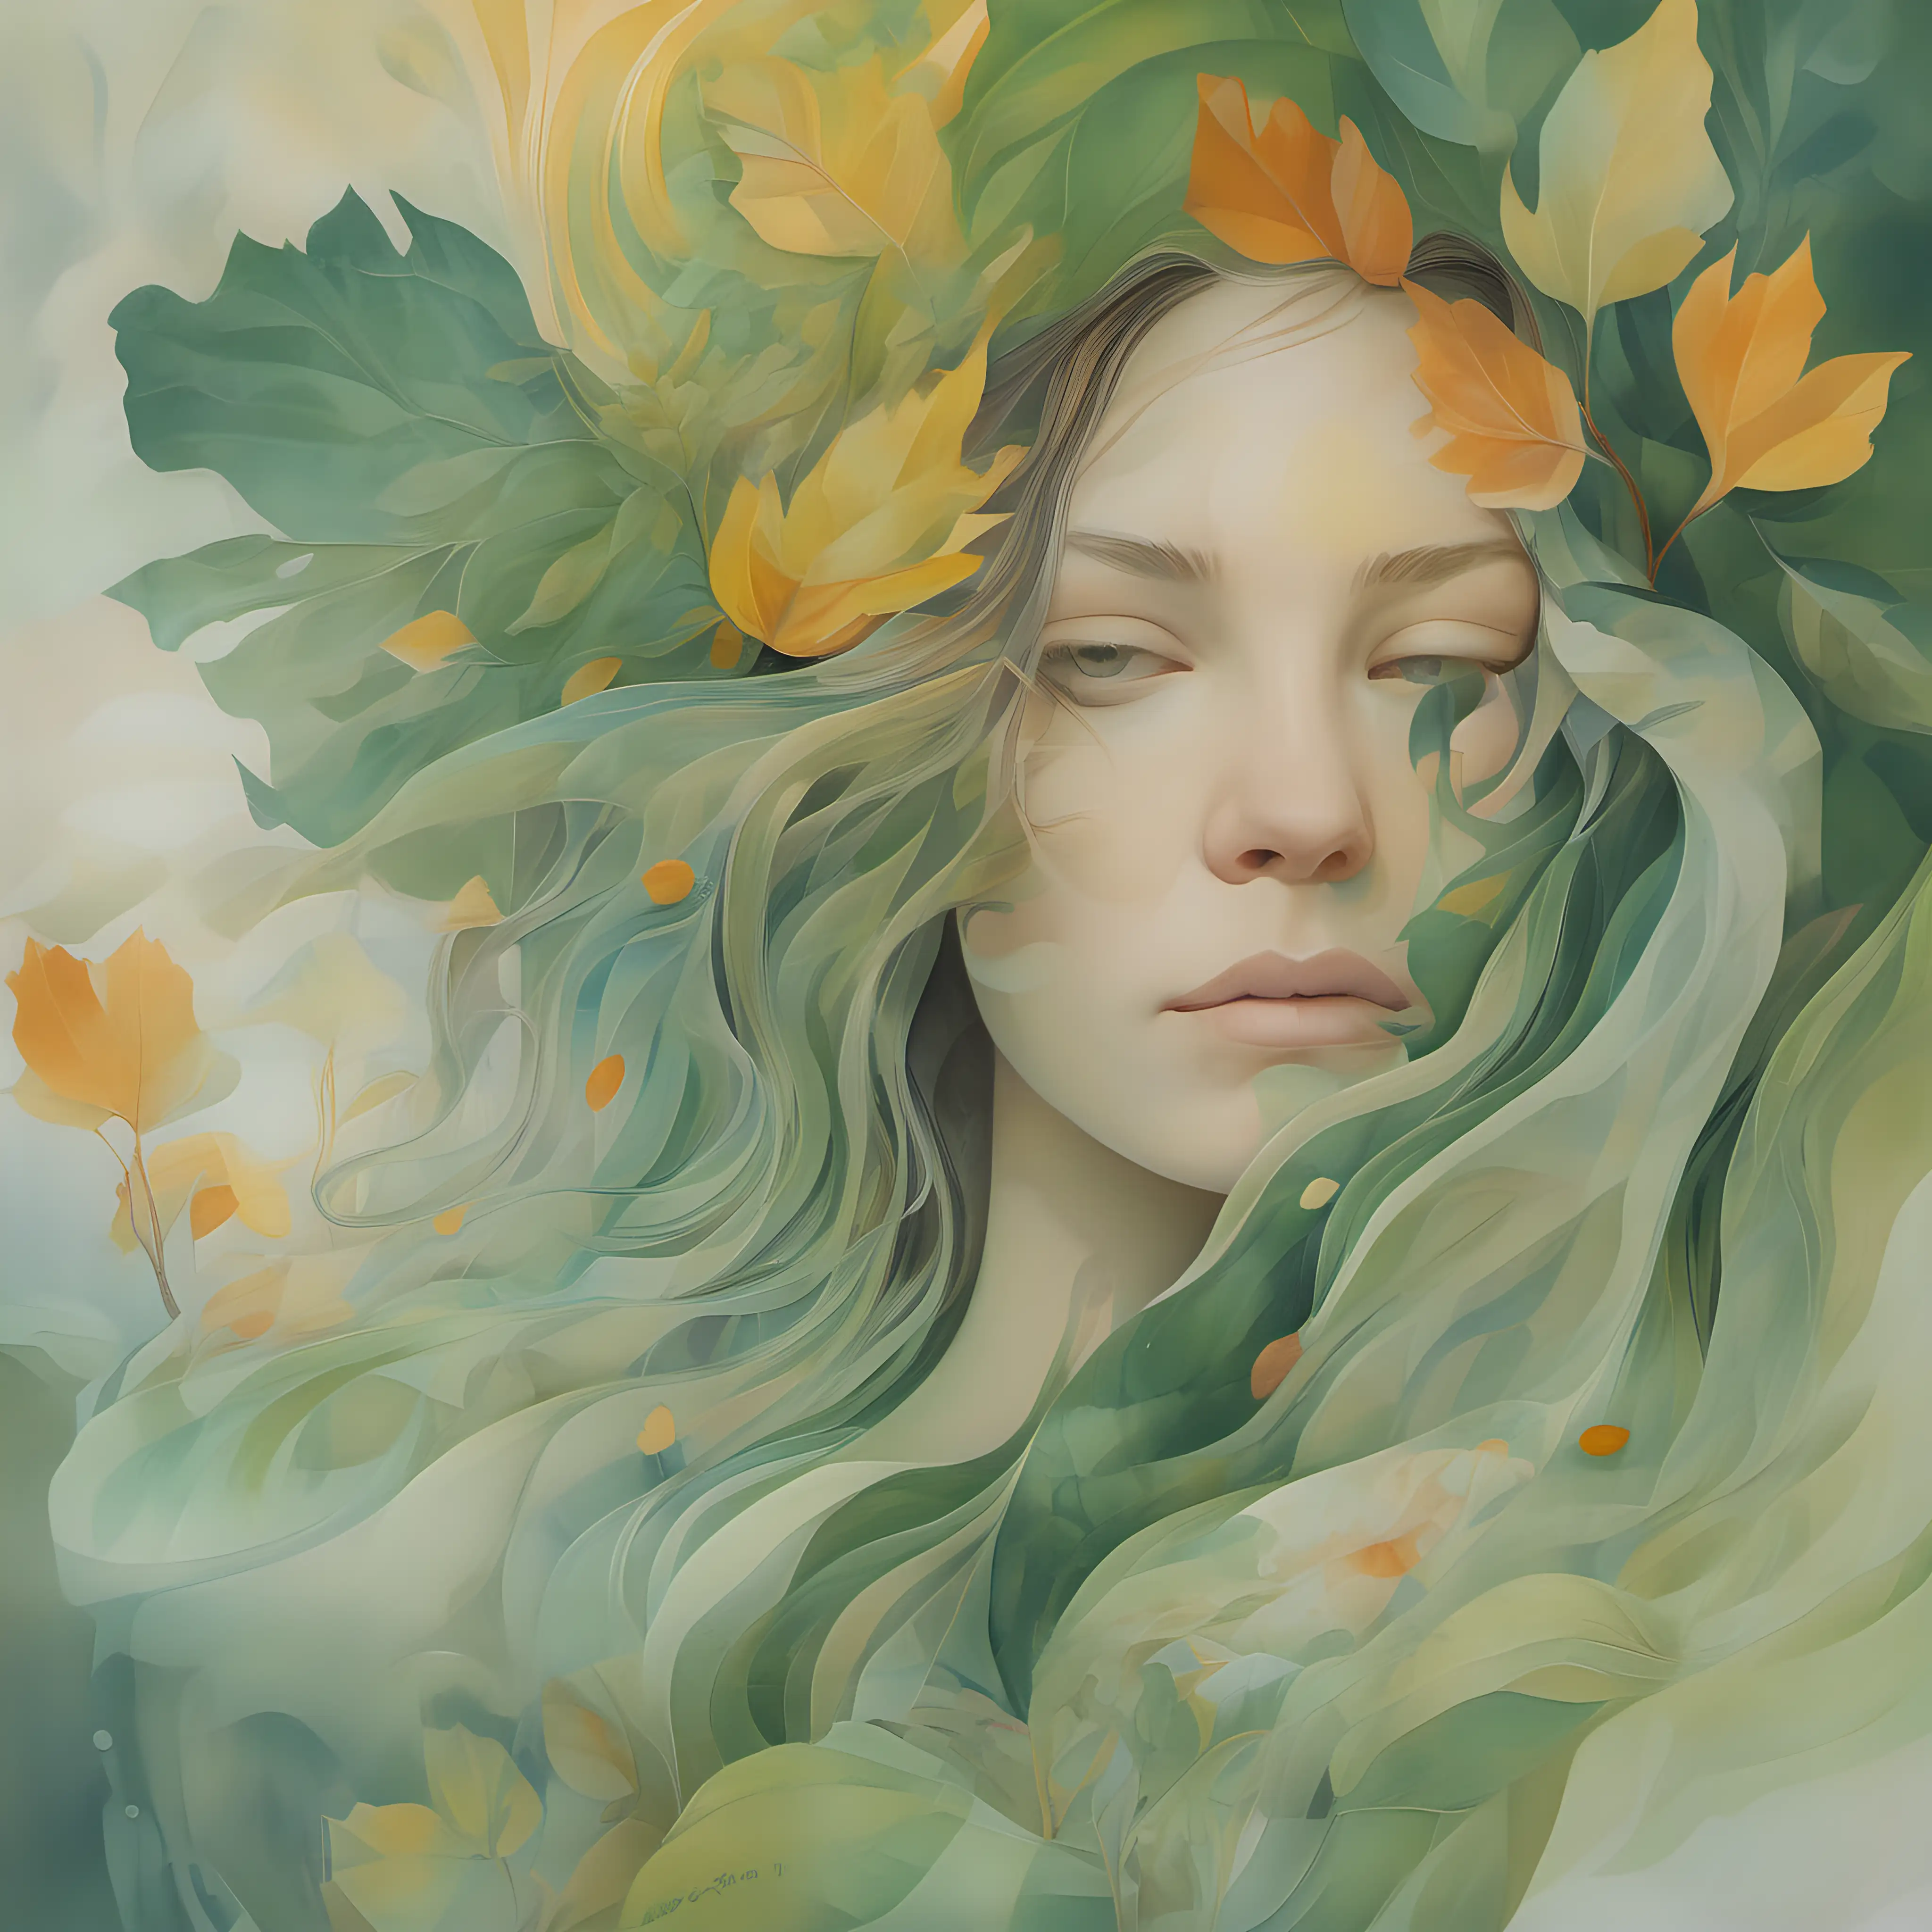 Ethereal Natures Serenity Woman Merging with Painterly Foliage by Twilight Seascape